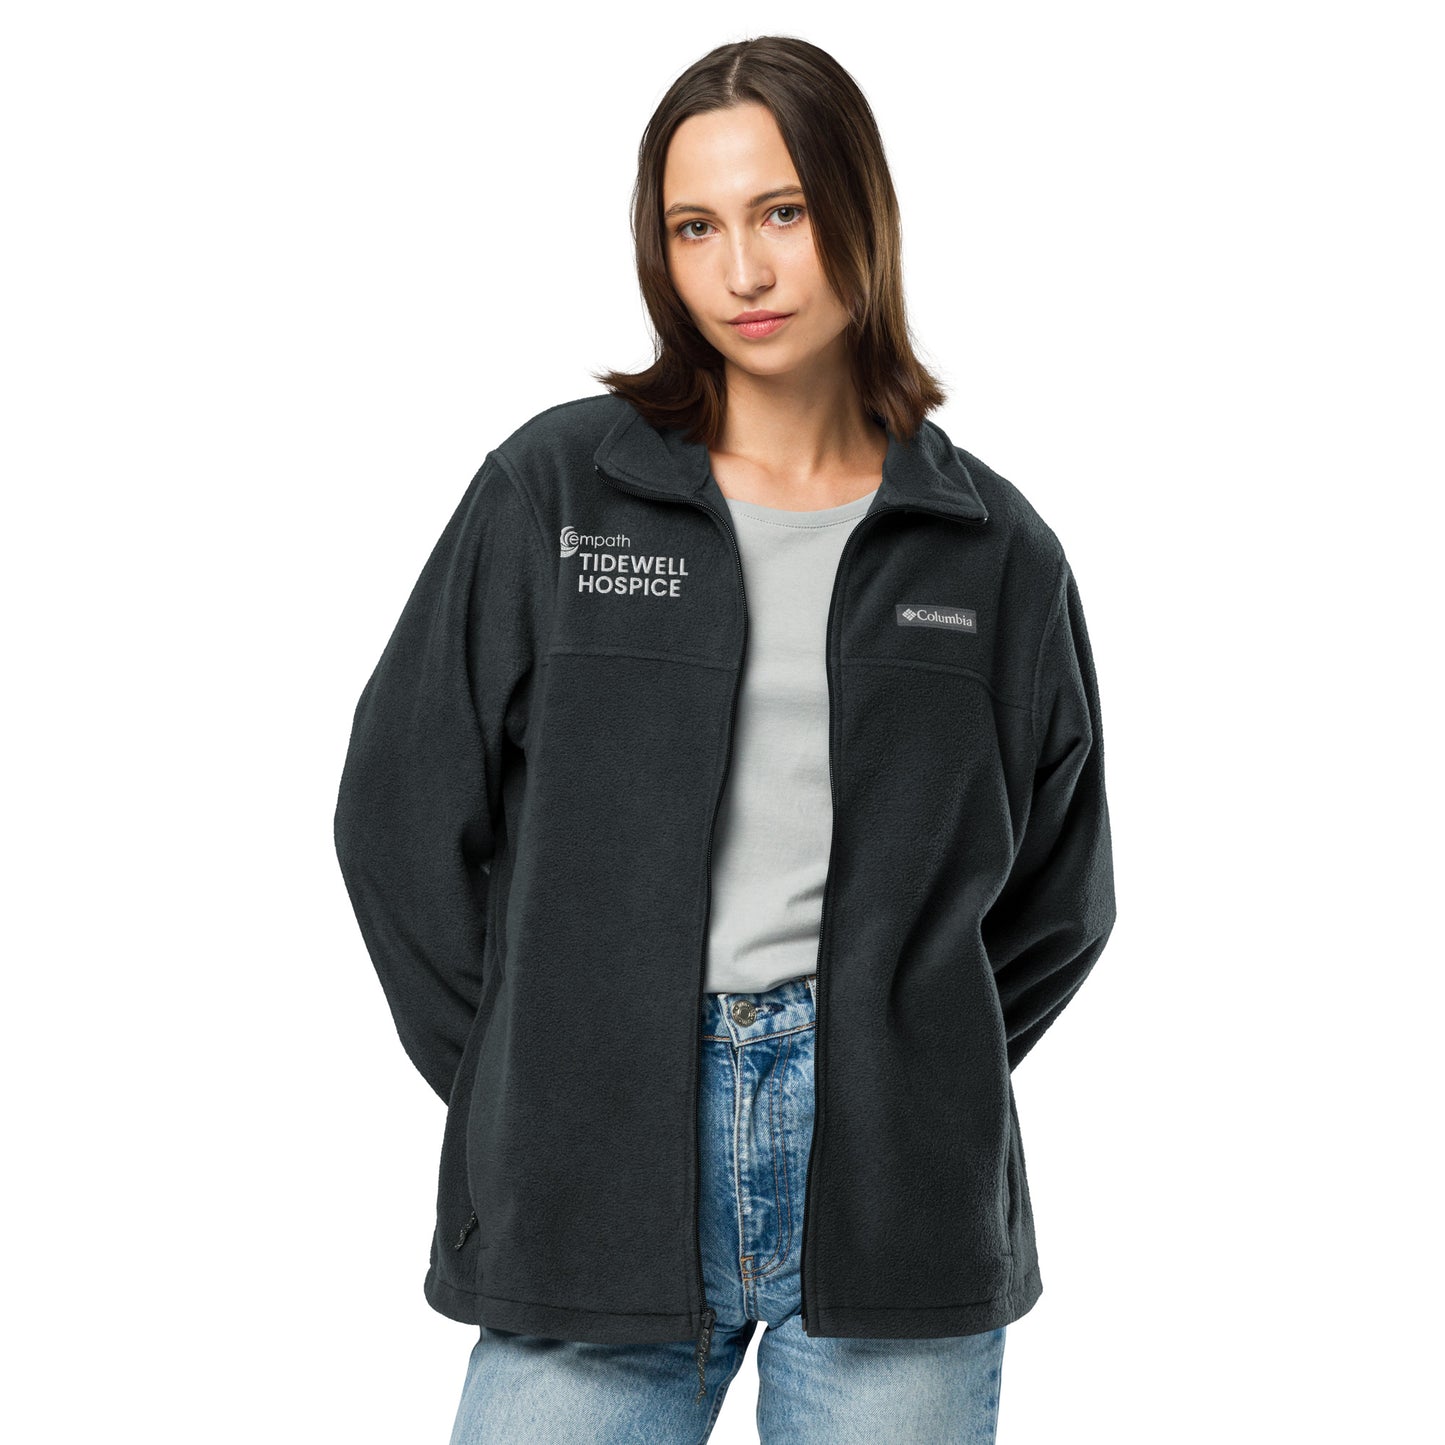 Columbia | Unisex fleece jacket (relaxed fit) - Tidewell Hospice